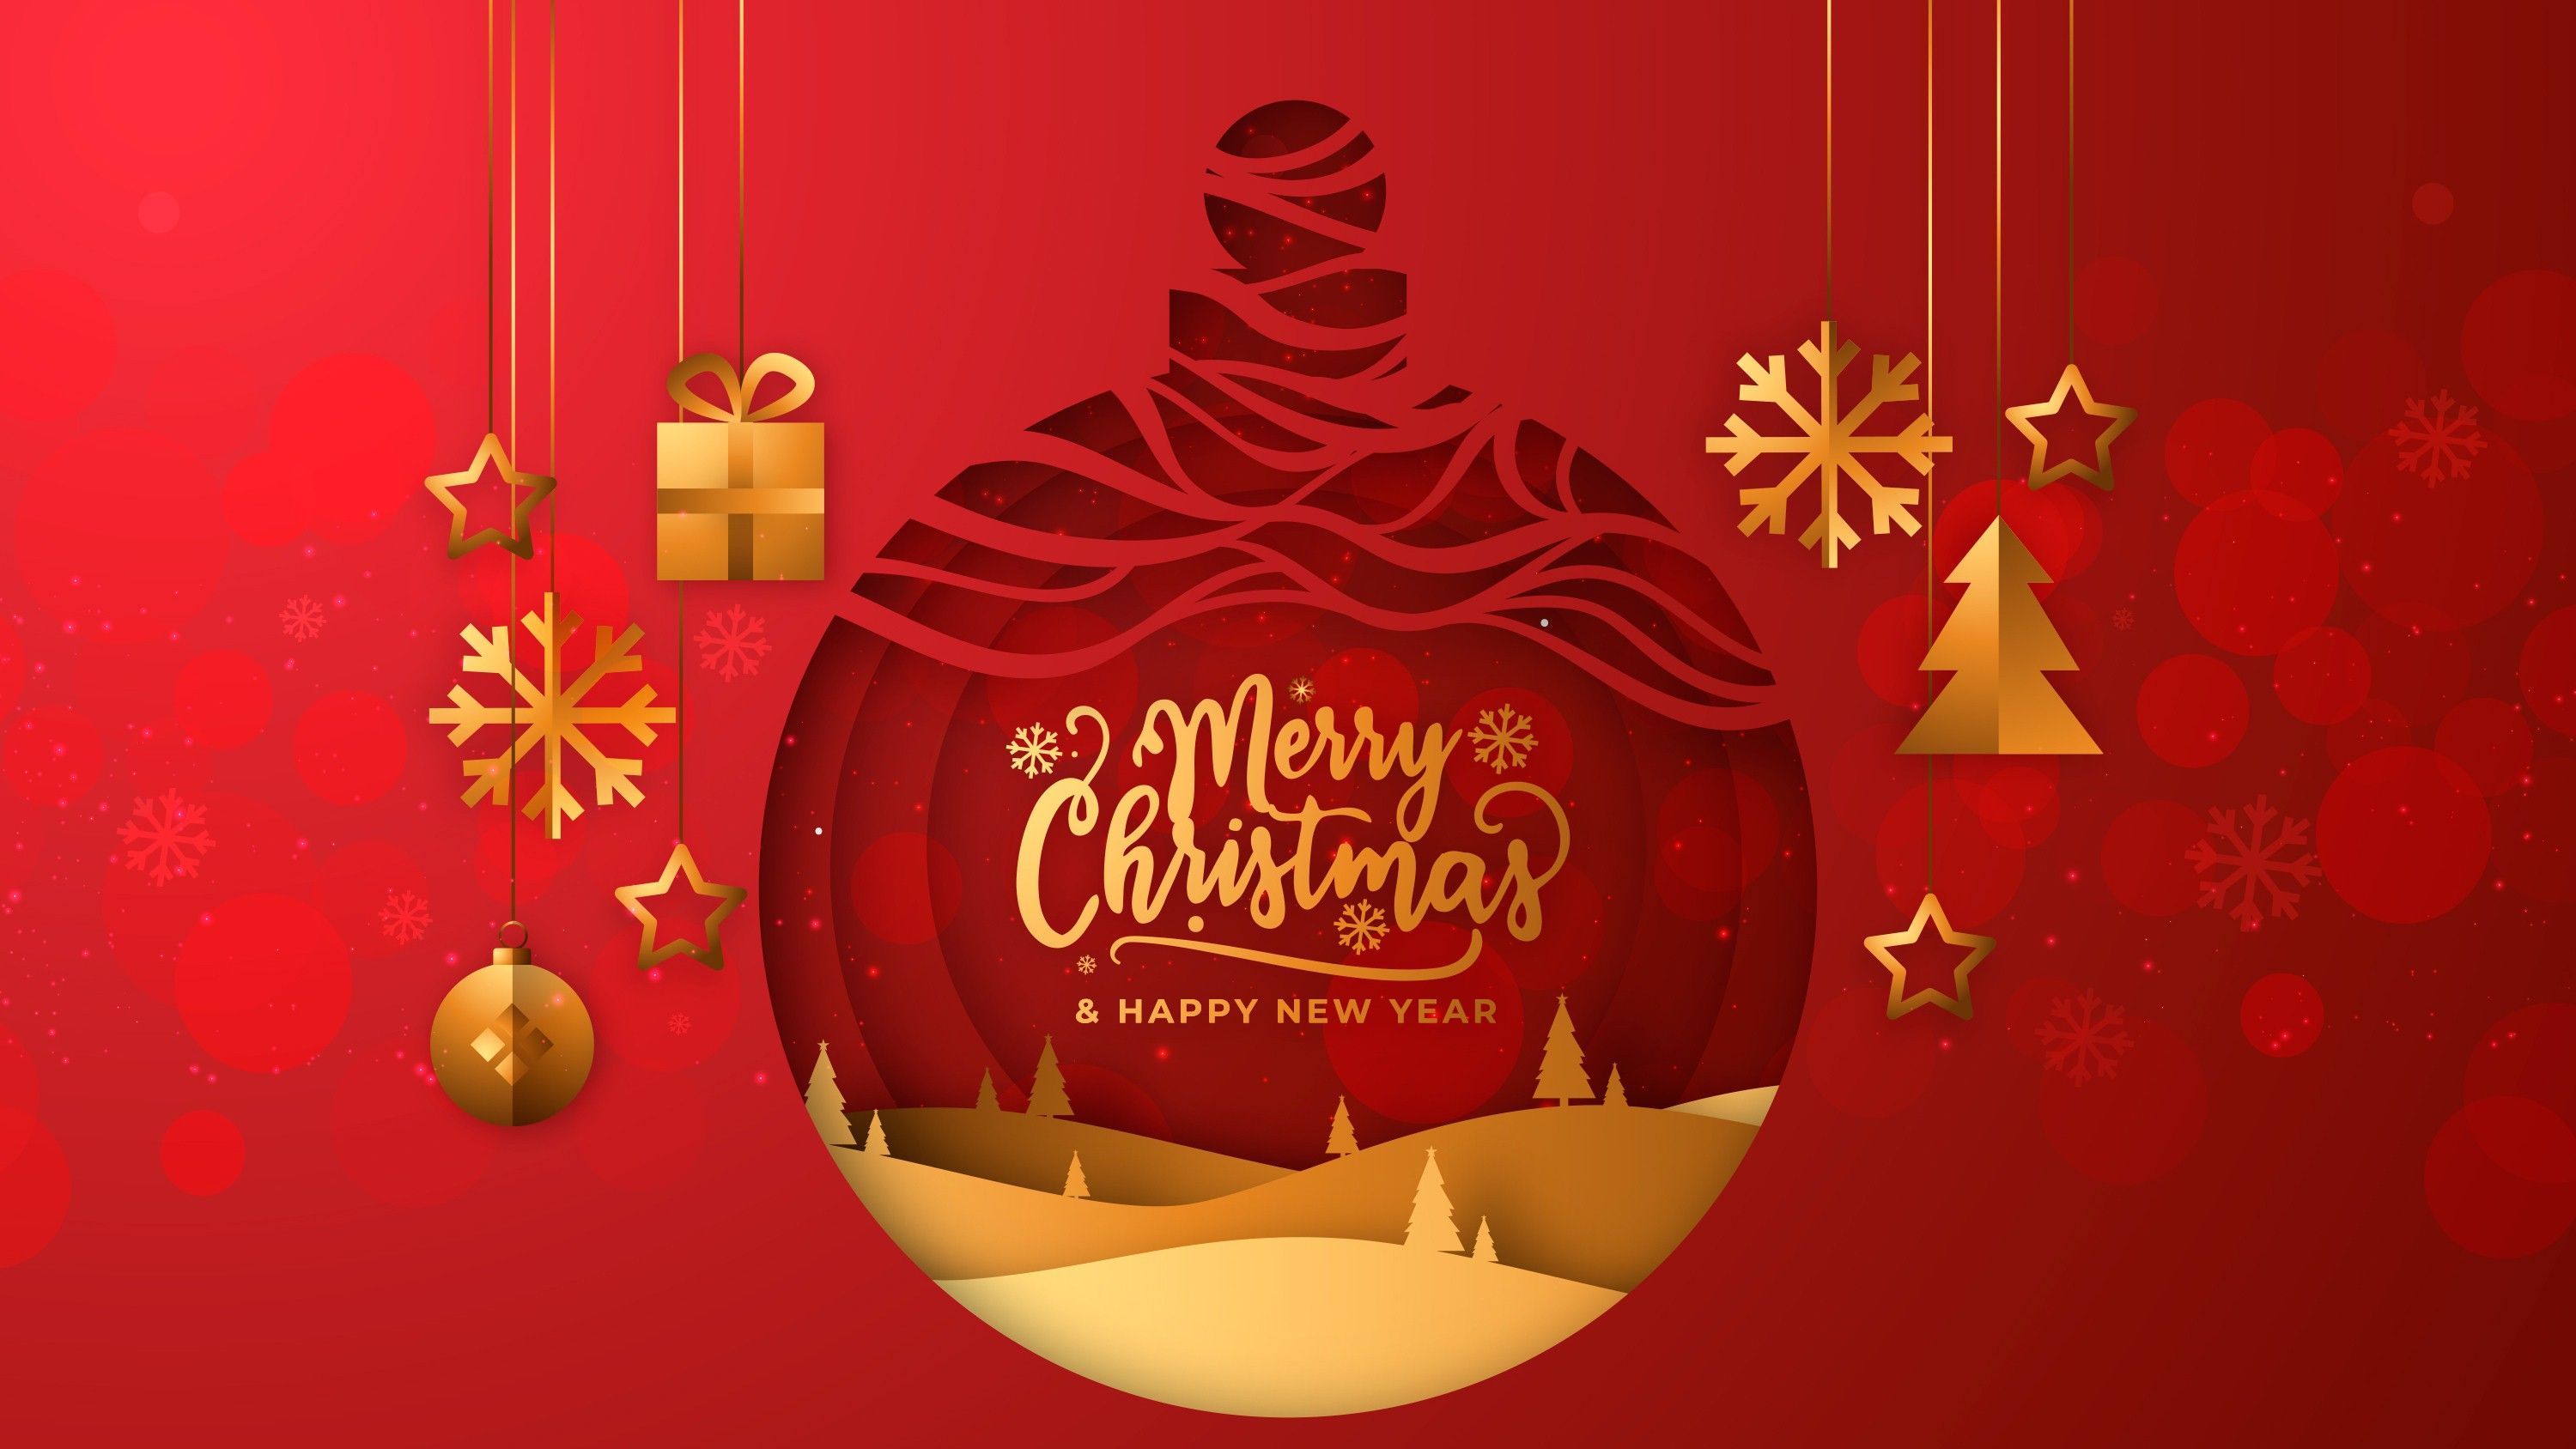 Amazing Wallpaper of Merry Christmas Red Background